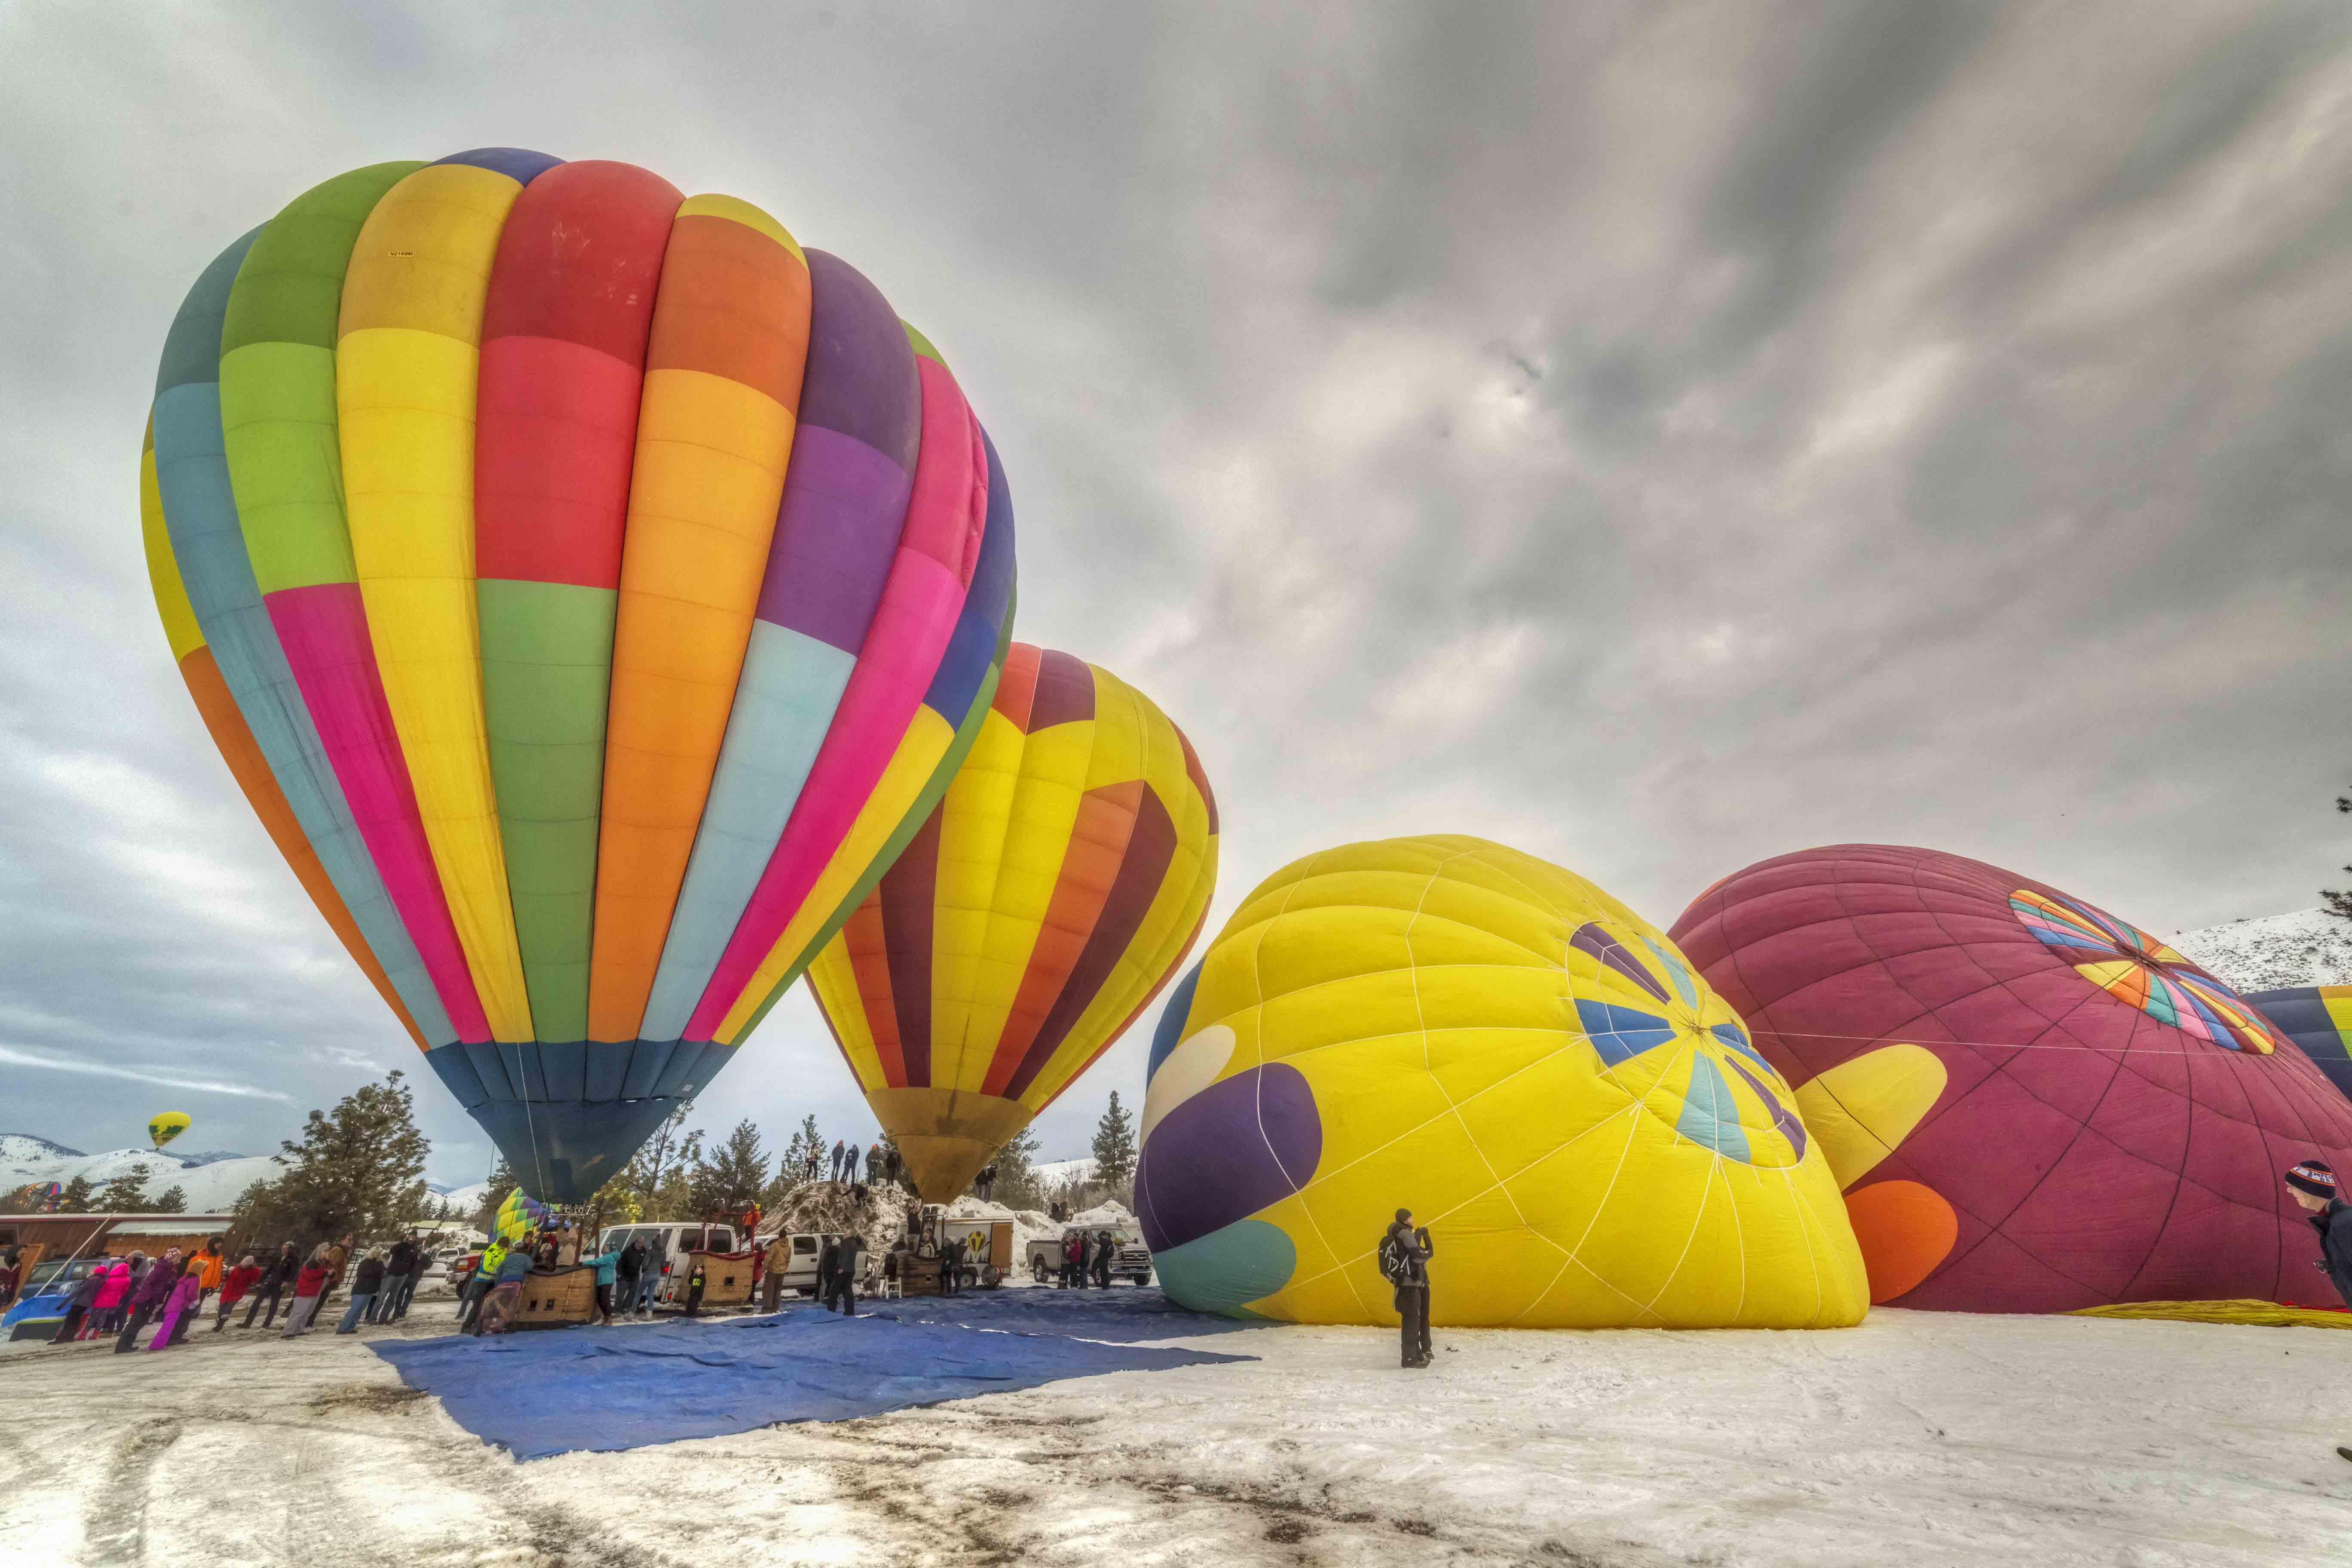 Winthrop Balloon Festival 10 March 2018 Andy Porter Images